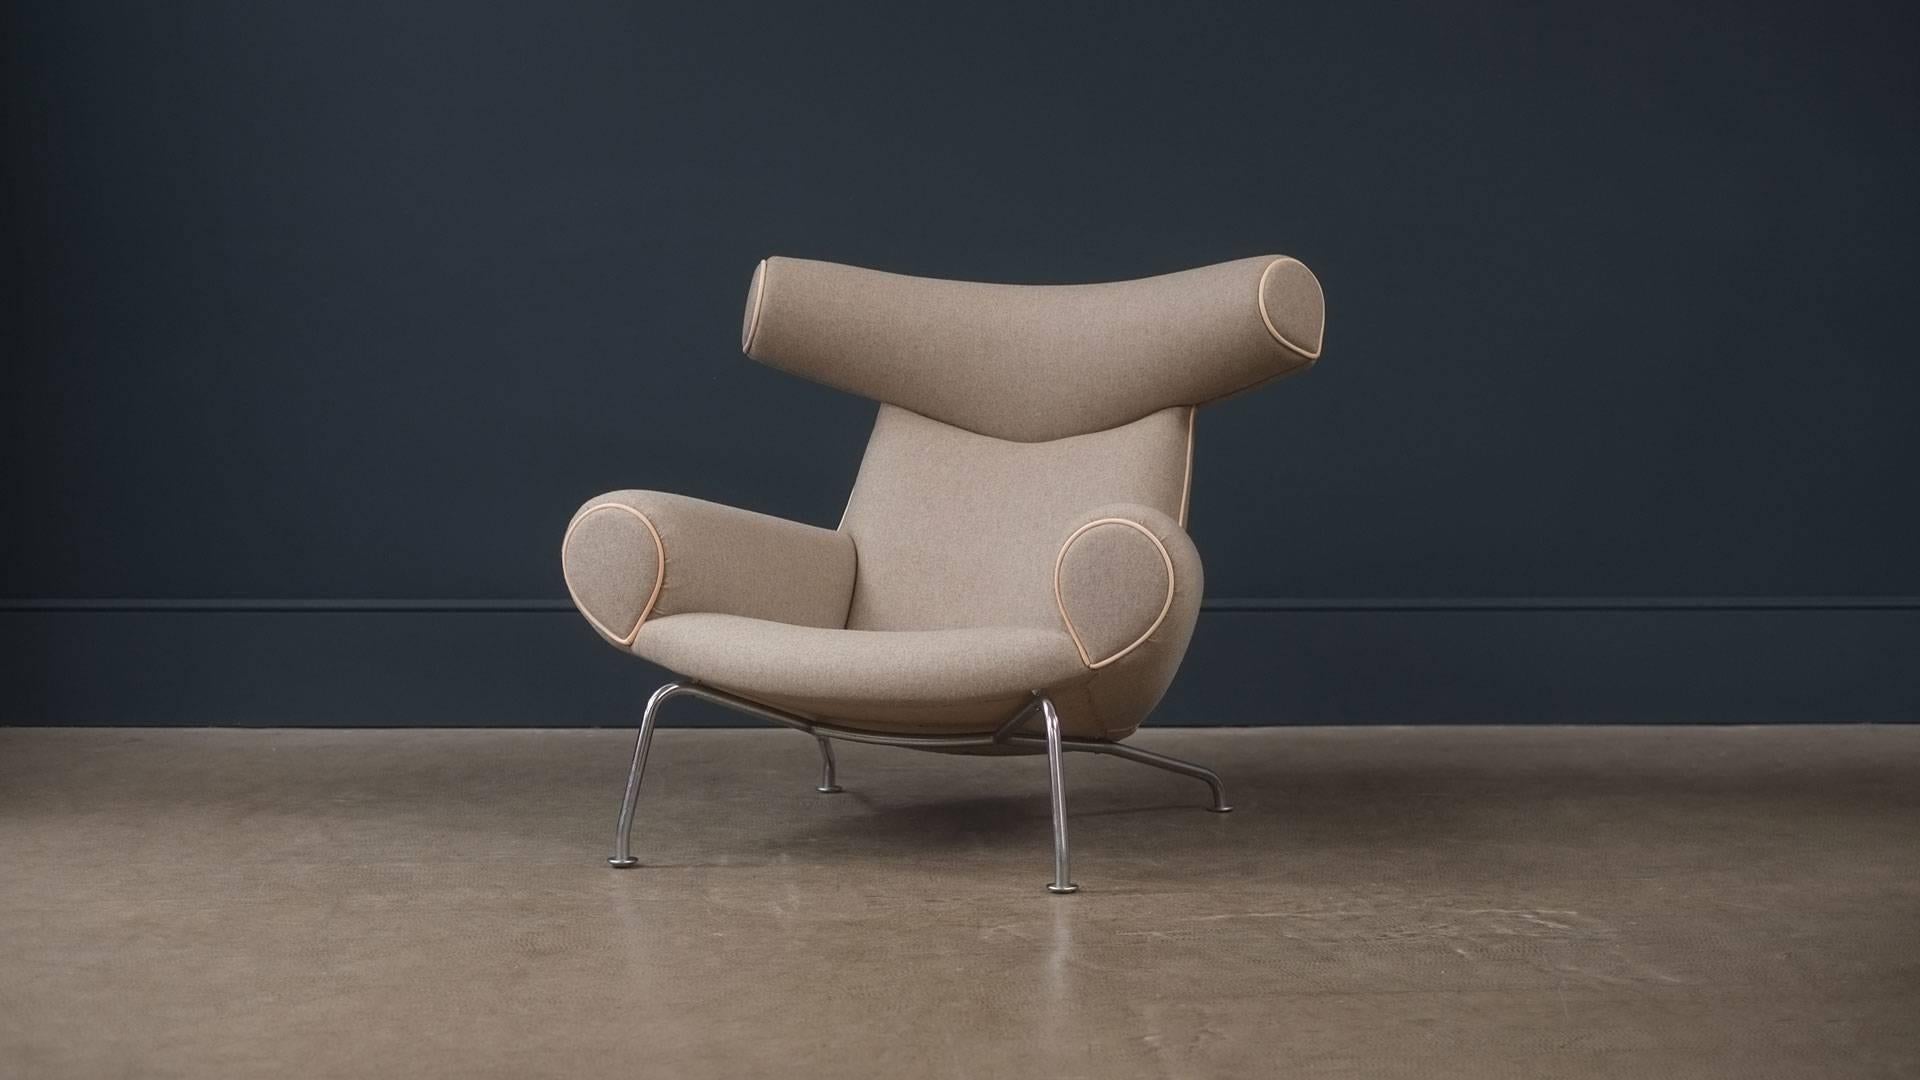 Amazing original ox chair, model AP46, designed by Hans Wegner for AP Stolen, Denmark, 1960. Early example fully refurbished and reupholstered in grey/beige wool by Warwick and natural leather piping. Wonderful and ultra rare piece of super